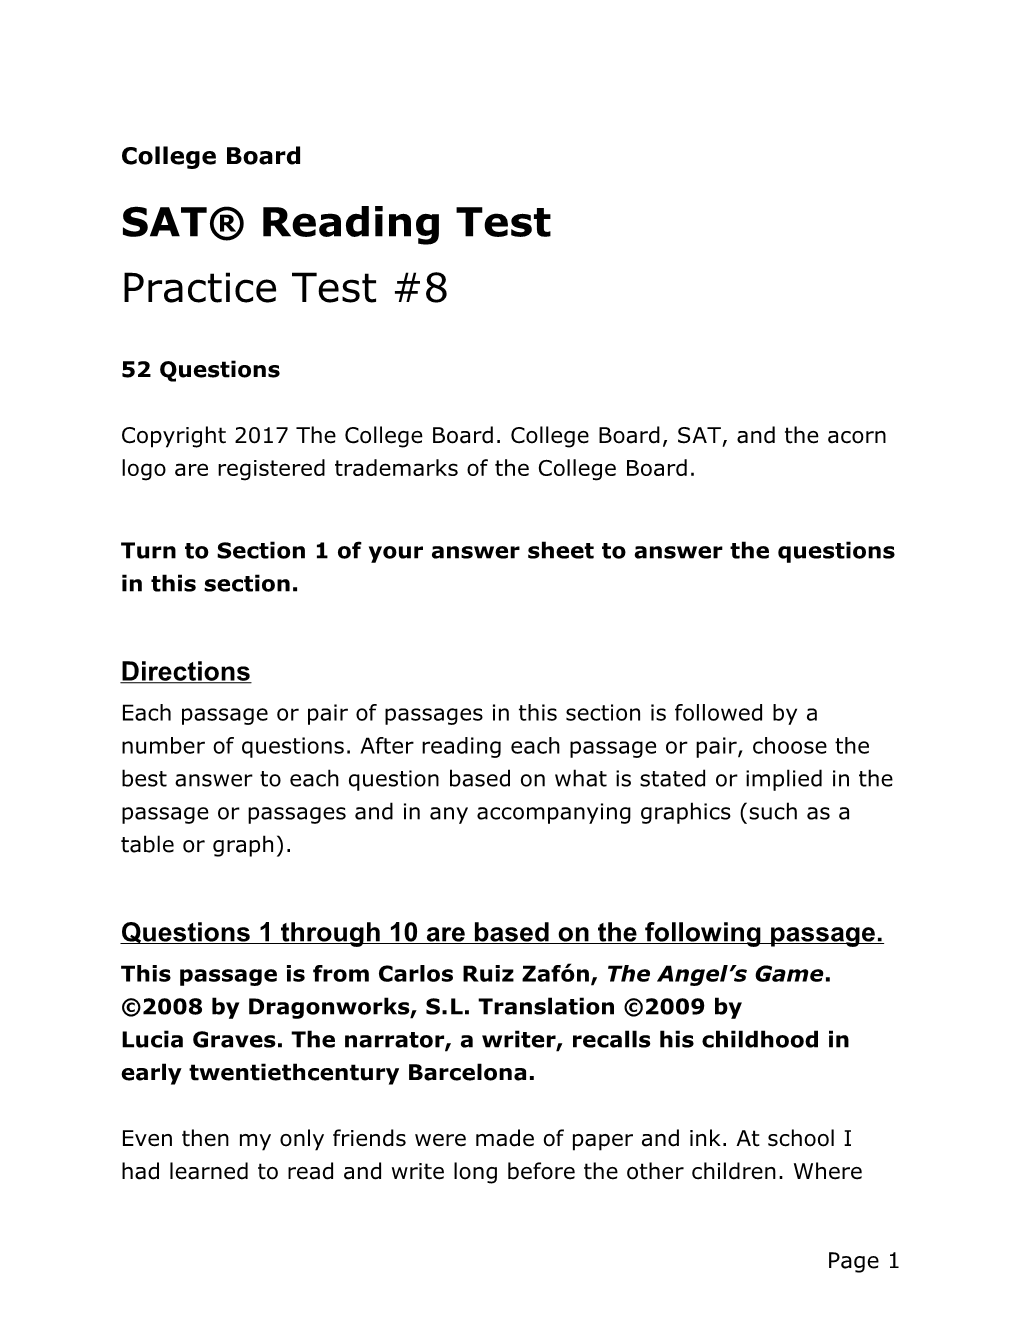 SAT Practice Test 8 for Assistive Technology Reading Test SAT Suite of Assessments The